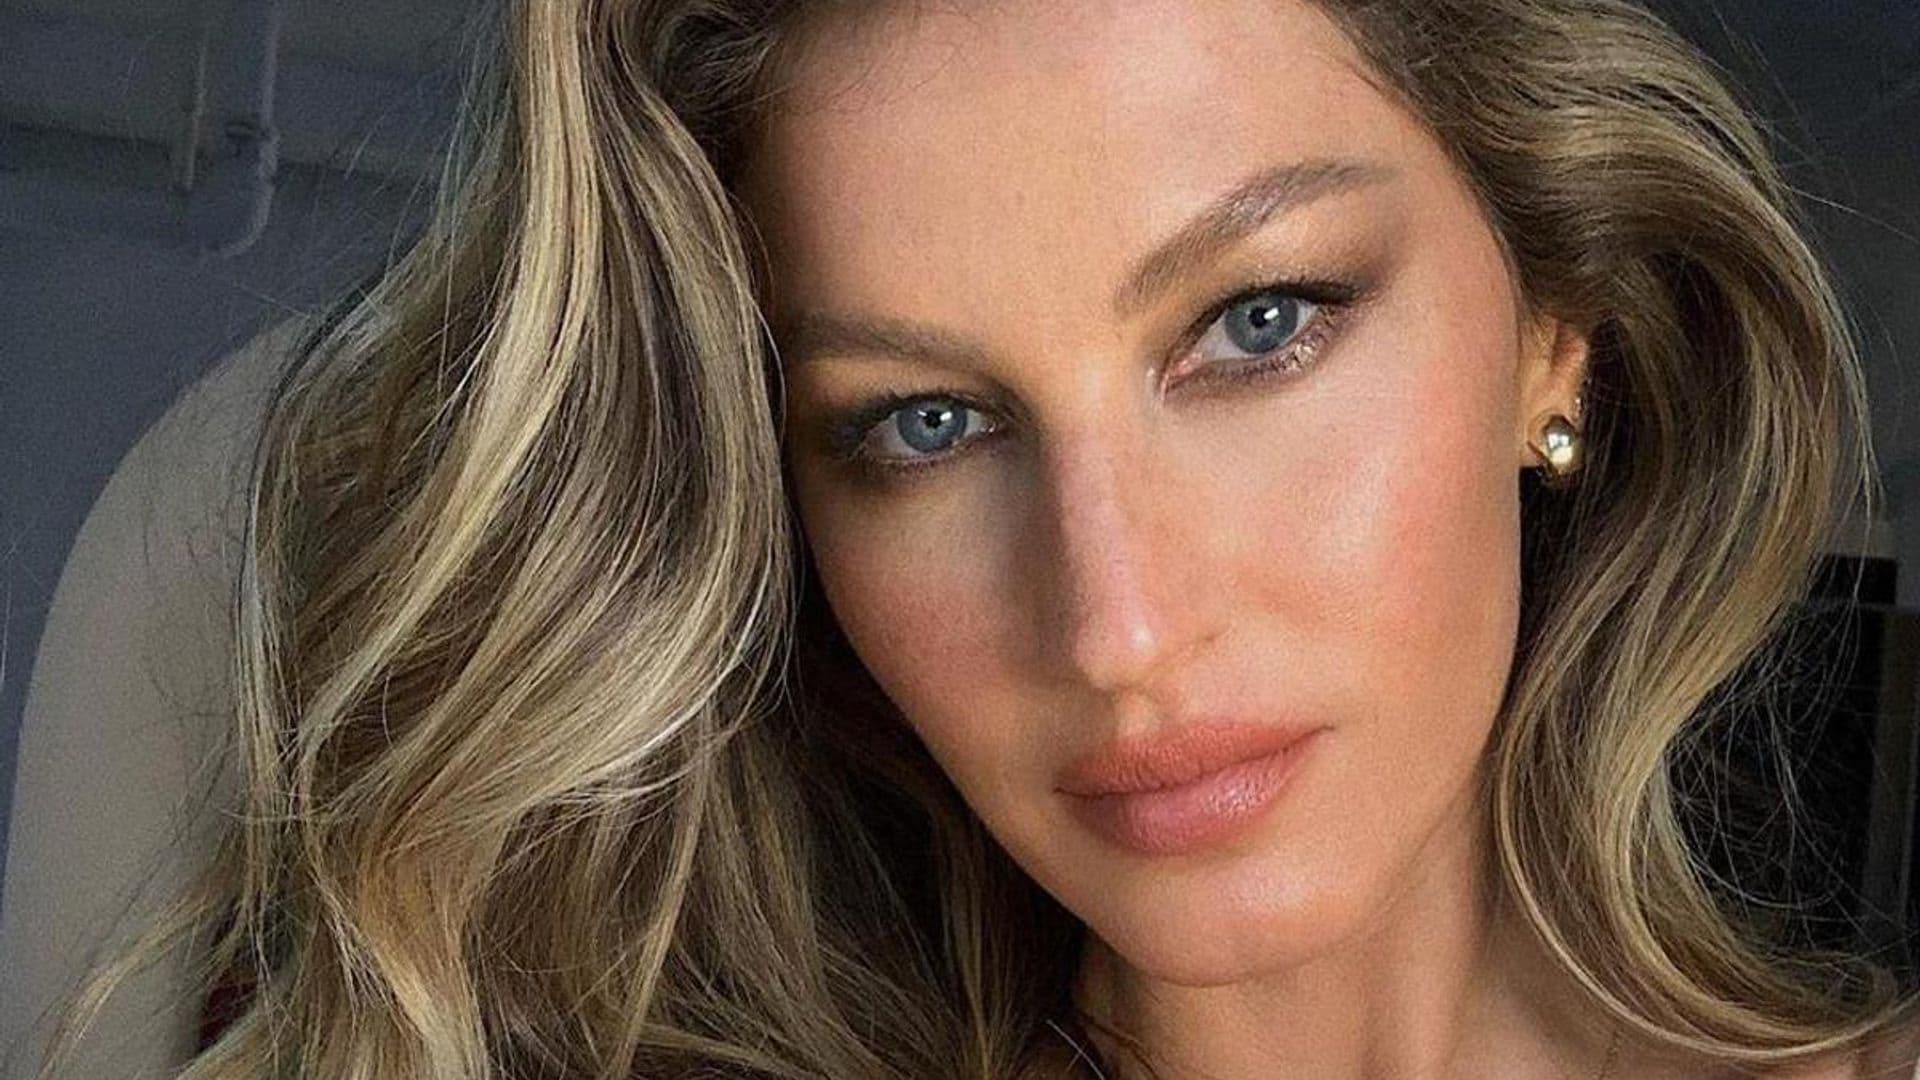 Gisele Bündchen reacts to Jay Shetty’s post about consistency in relationships